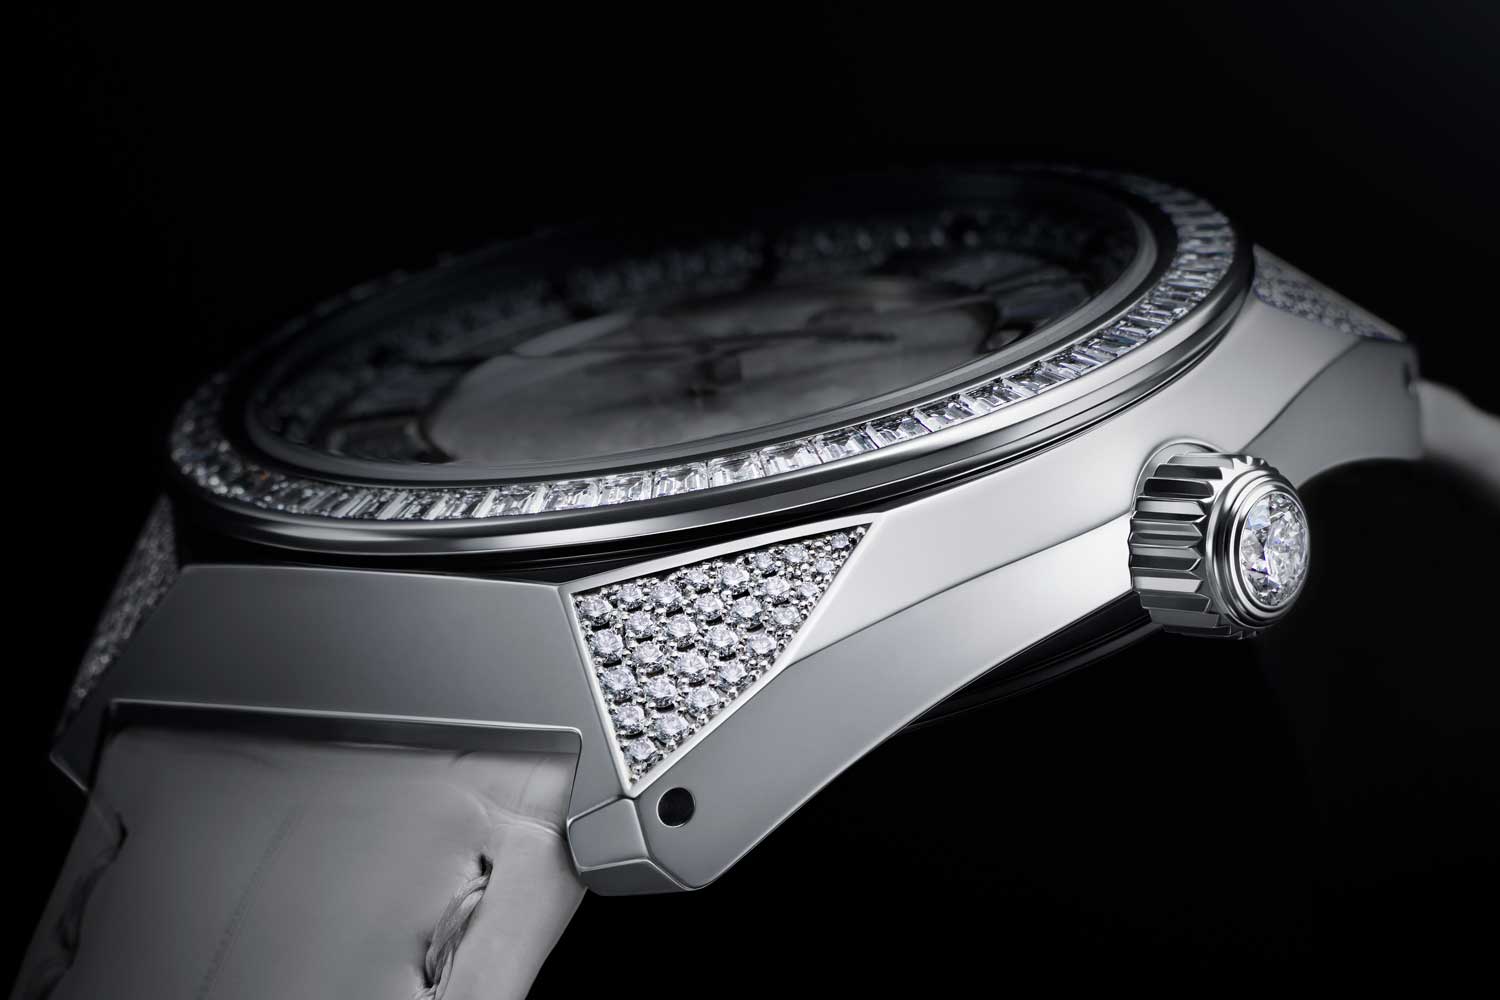 The diamonds setting on the case is so precise it presents a flawless and uniform finish